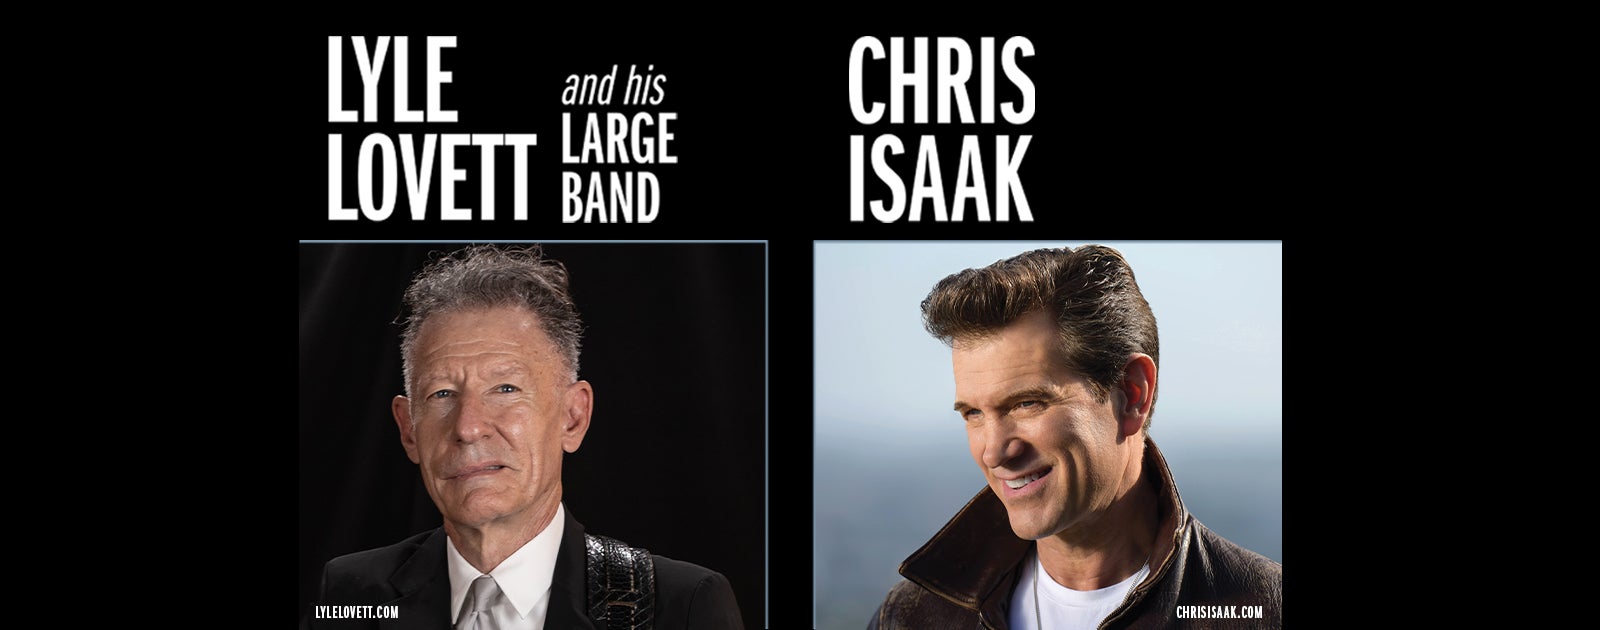 Lyle Lovett and His Large Band and Chris Isaak Stifel Theatre